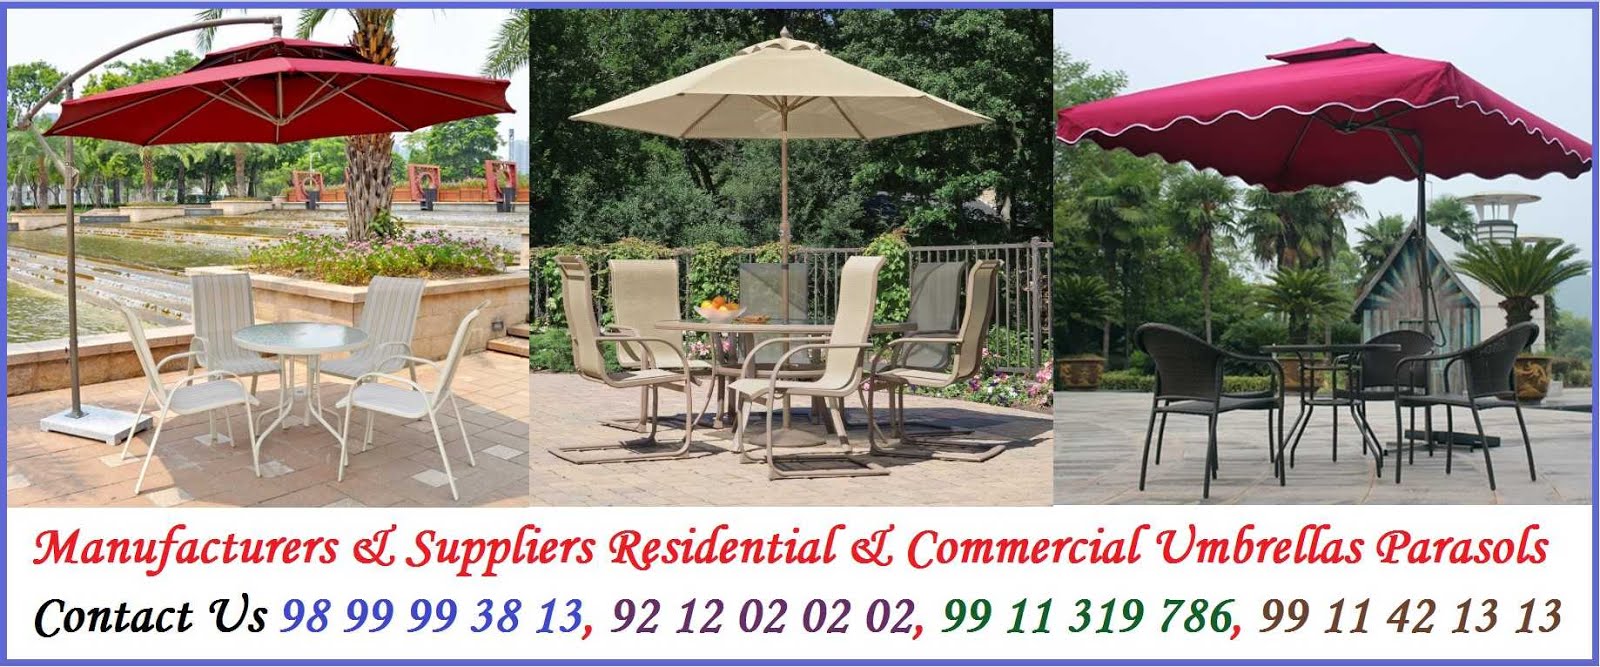 Manufacturers & Suppliers of Residential, Commercial & Outdoor Umbrellas